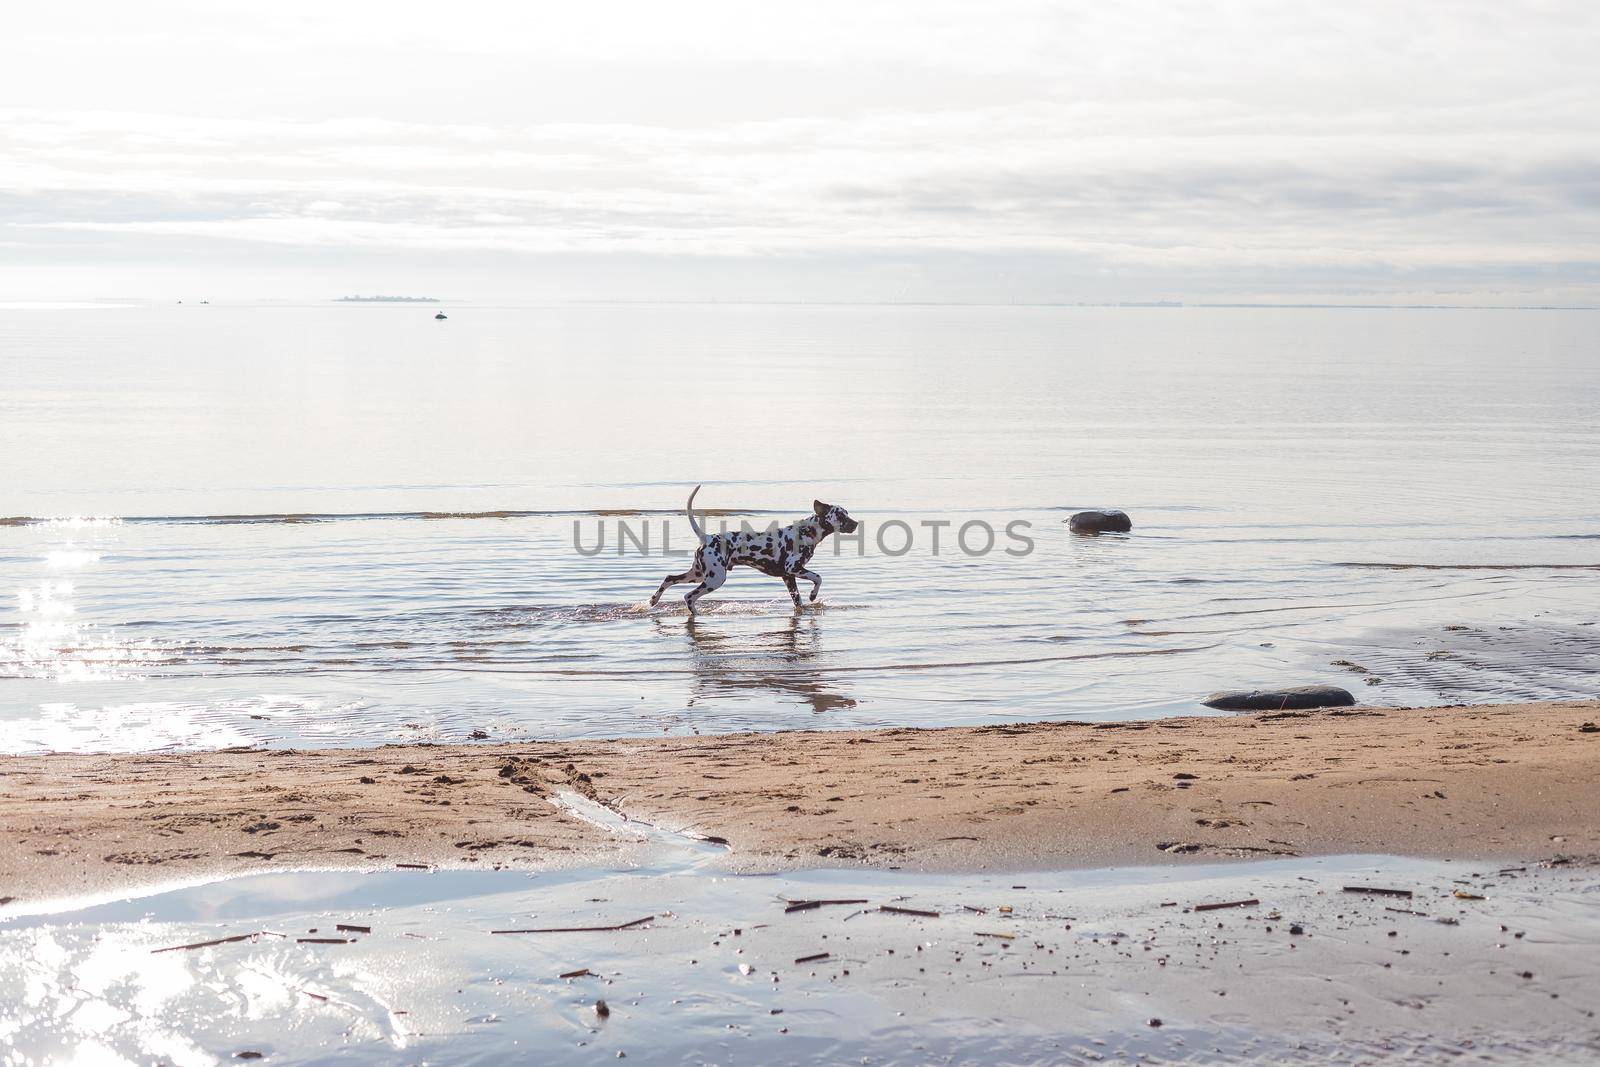 The Dalmatian is a breed of large-sized dog running on beach ,water splashes. brown dalmatian puppy on the beach.A purposeful spotted Dalmatian running through the water scattering spray by YuliaYaspe1979